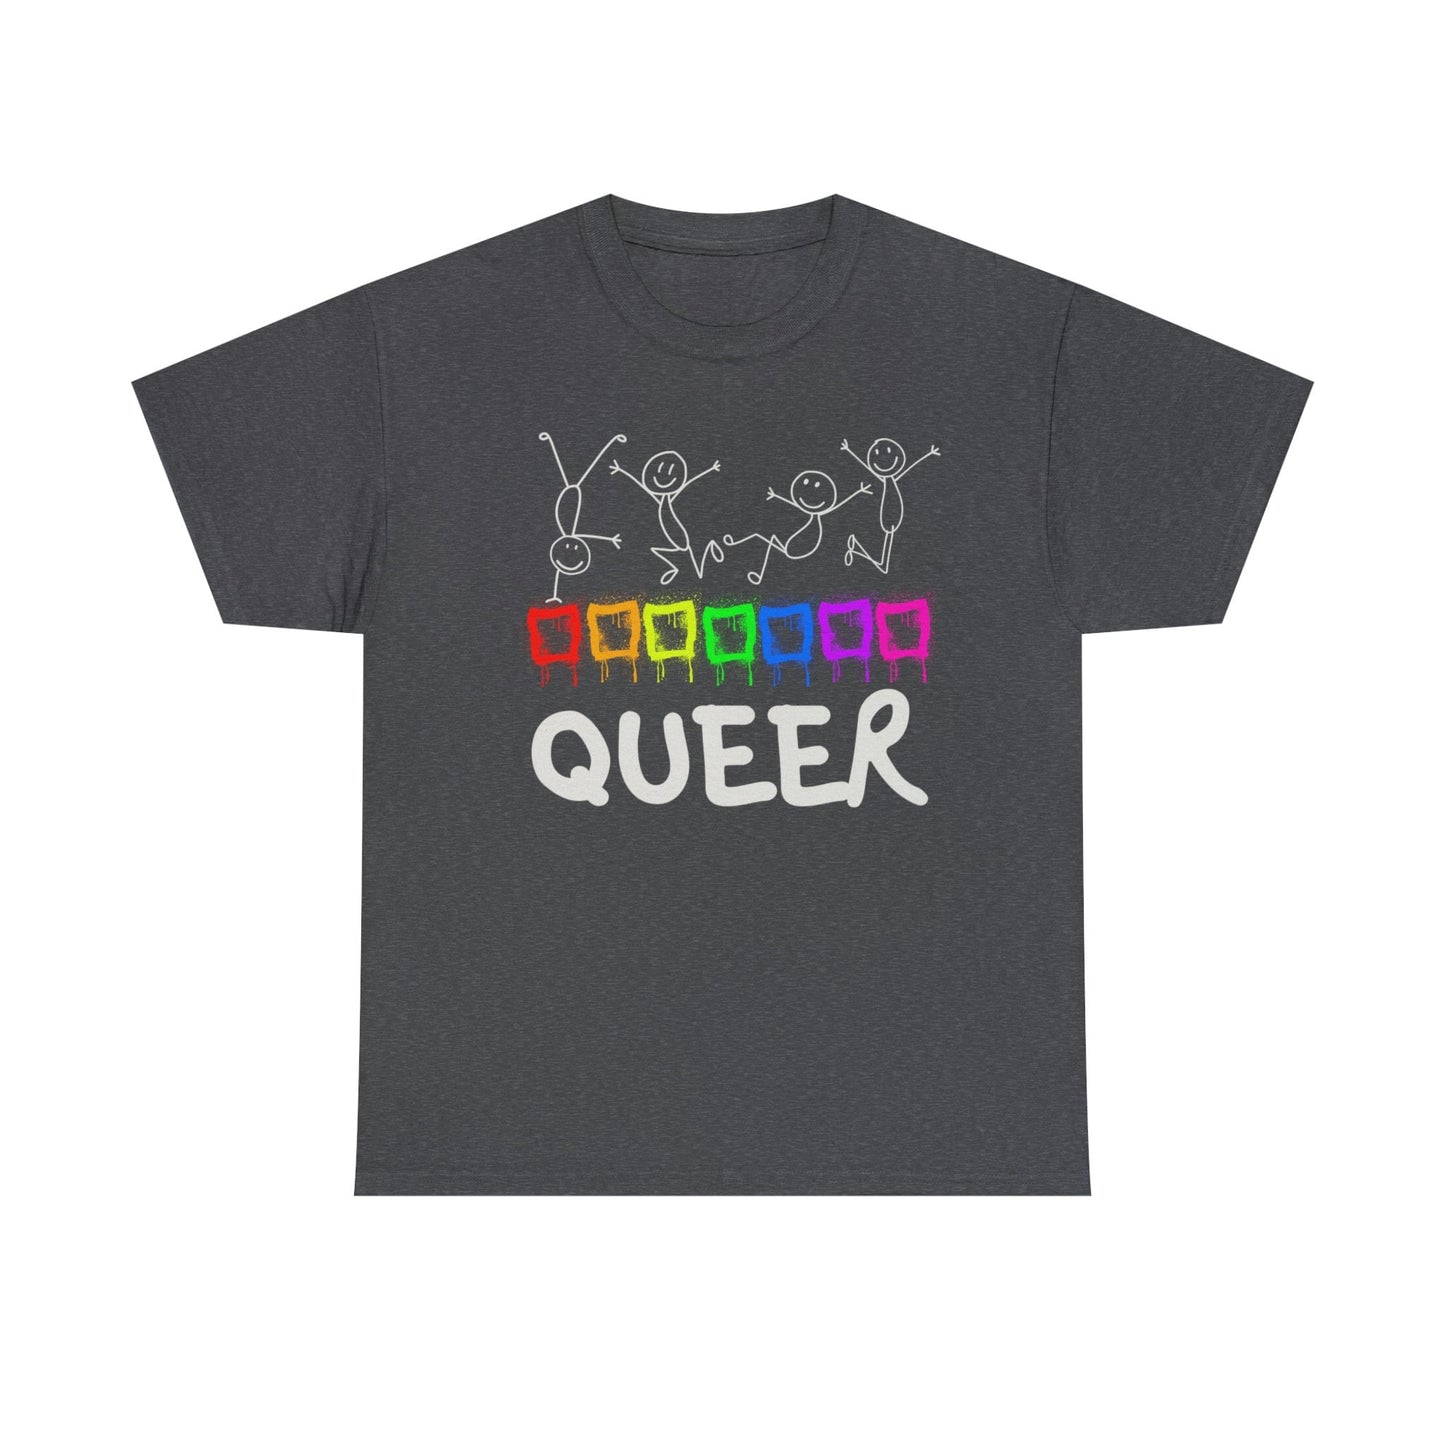 Queer Pride Festival T-shirt,  Love is Love, Pride Month gift, Rainbow graffiti, gift for Lesbian and Gay, Trendy Urban Clubbing Style